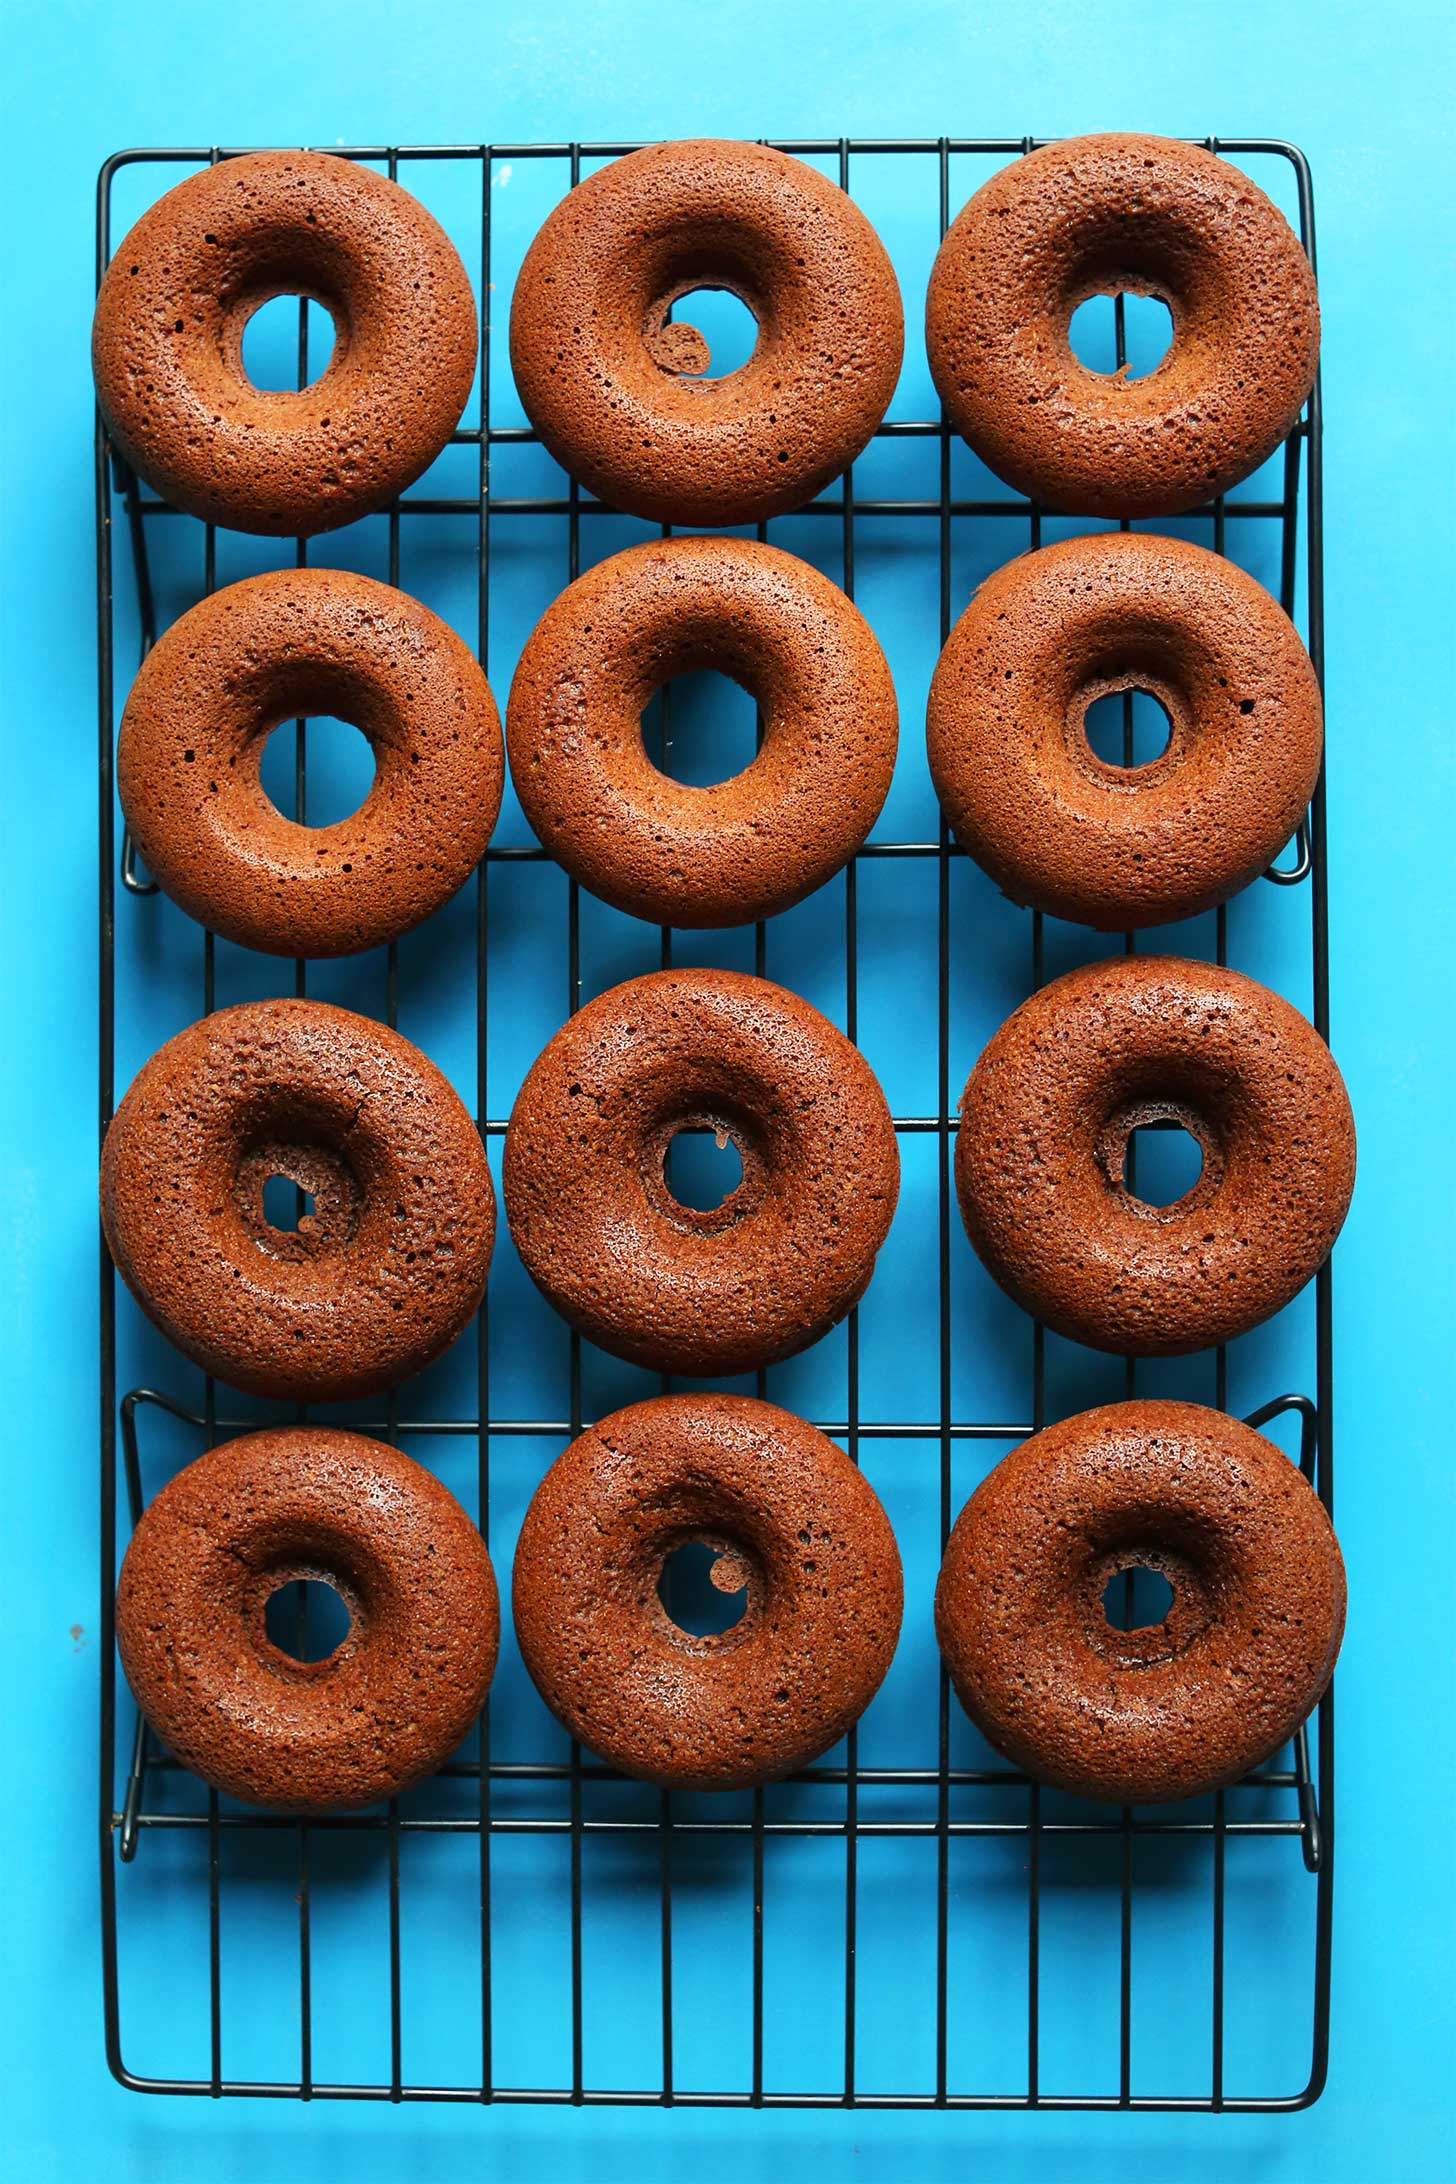 Cooling rack with freshly baked gluten free vegan Chocolate Donuts